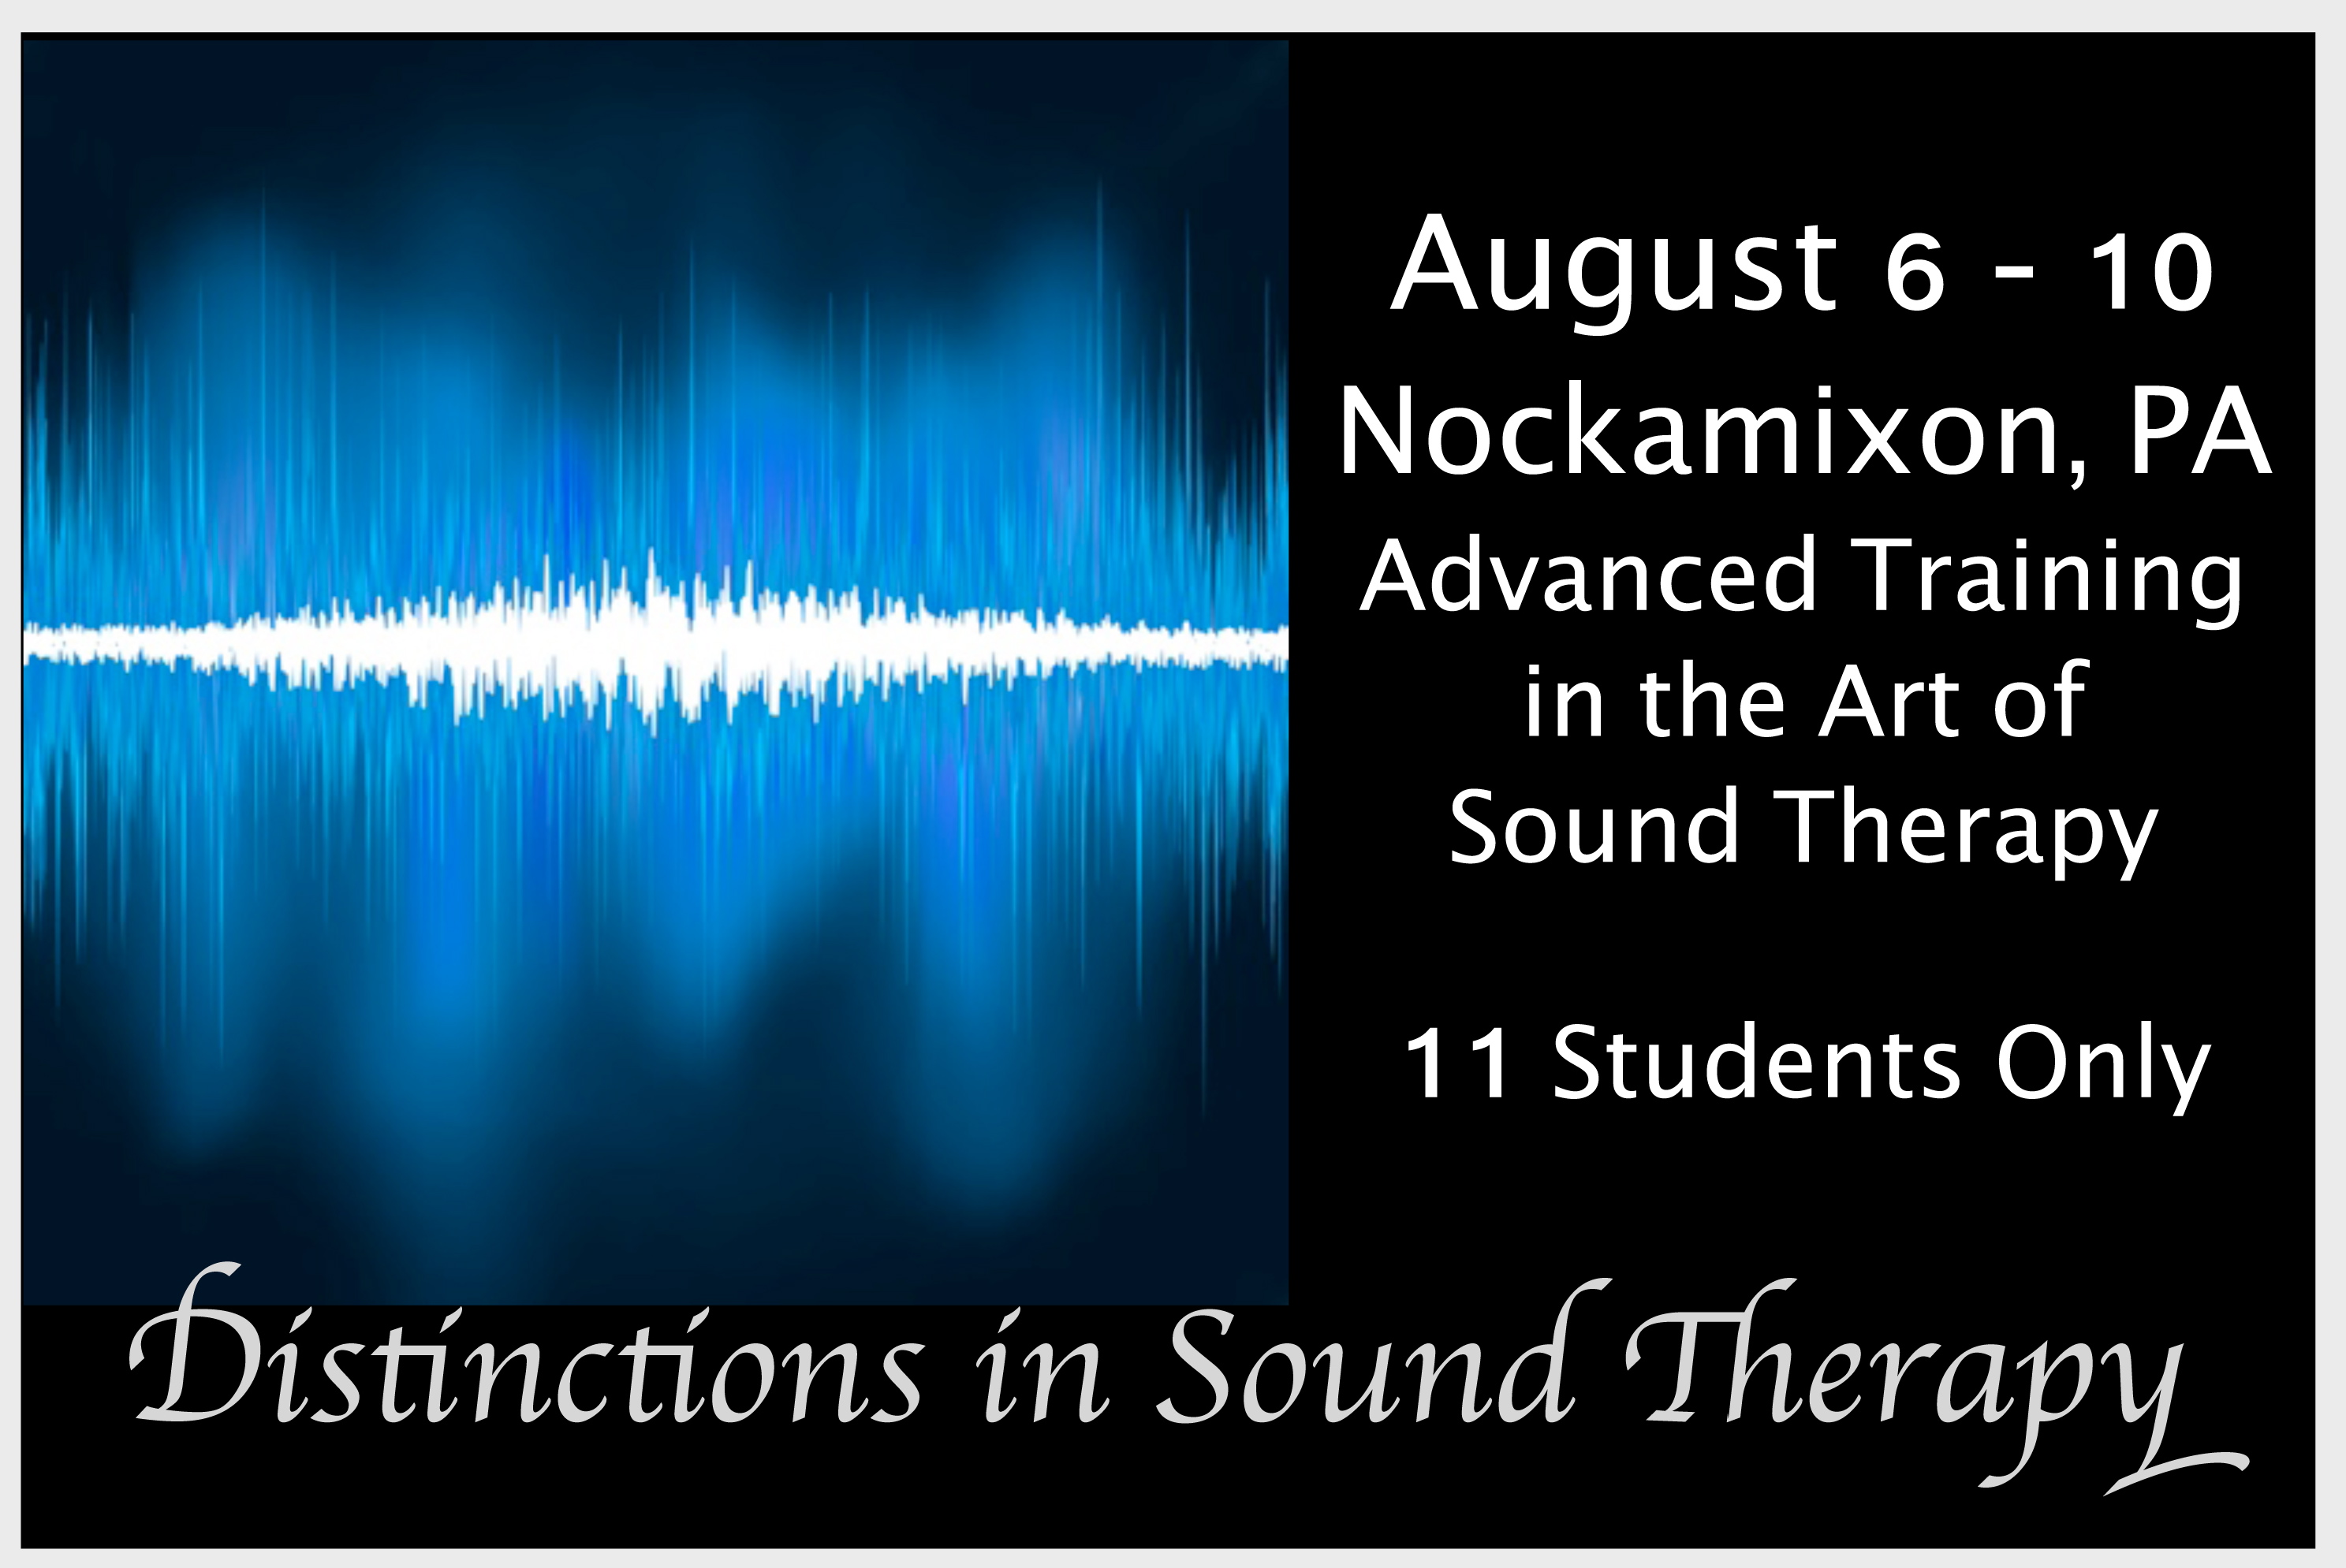 PERKASIE, PA - Distinctions in Sound Therapy